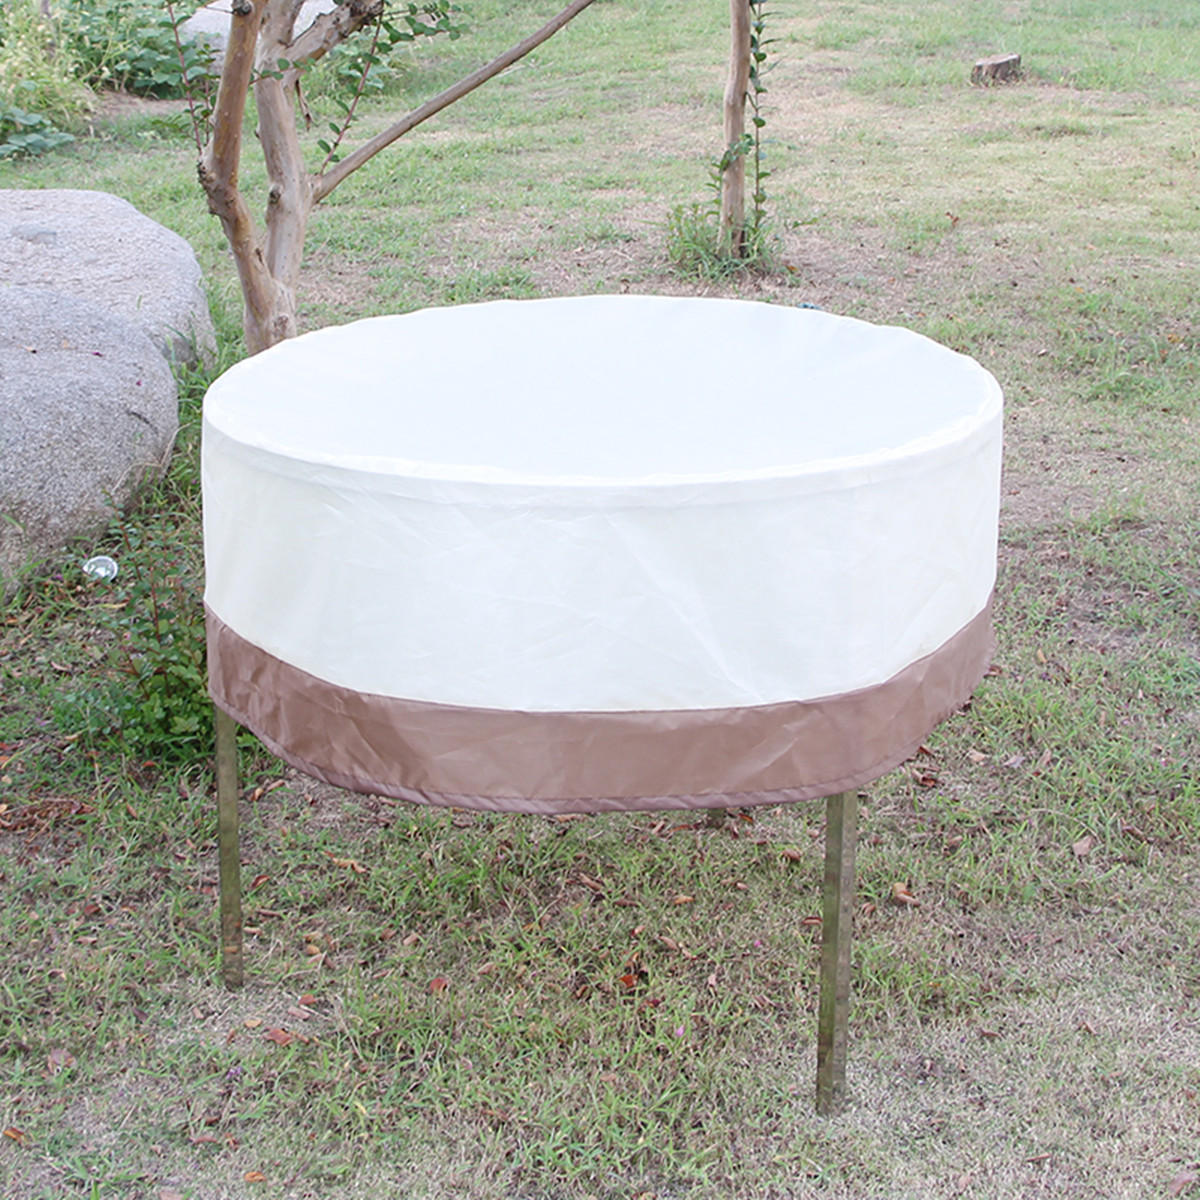 48inch Round Large Waterproof Outdoor Patio Round Table Chair Cover Furniture Protection